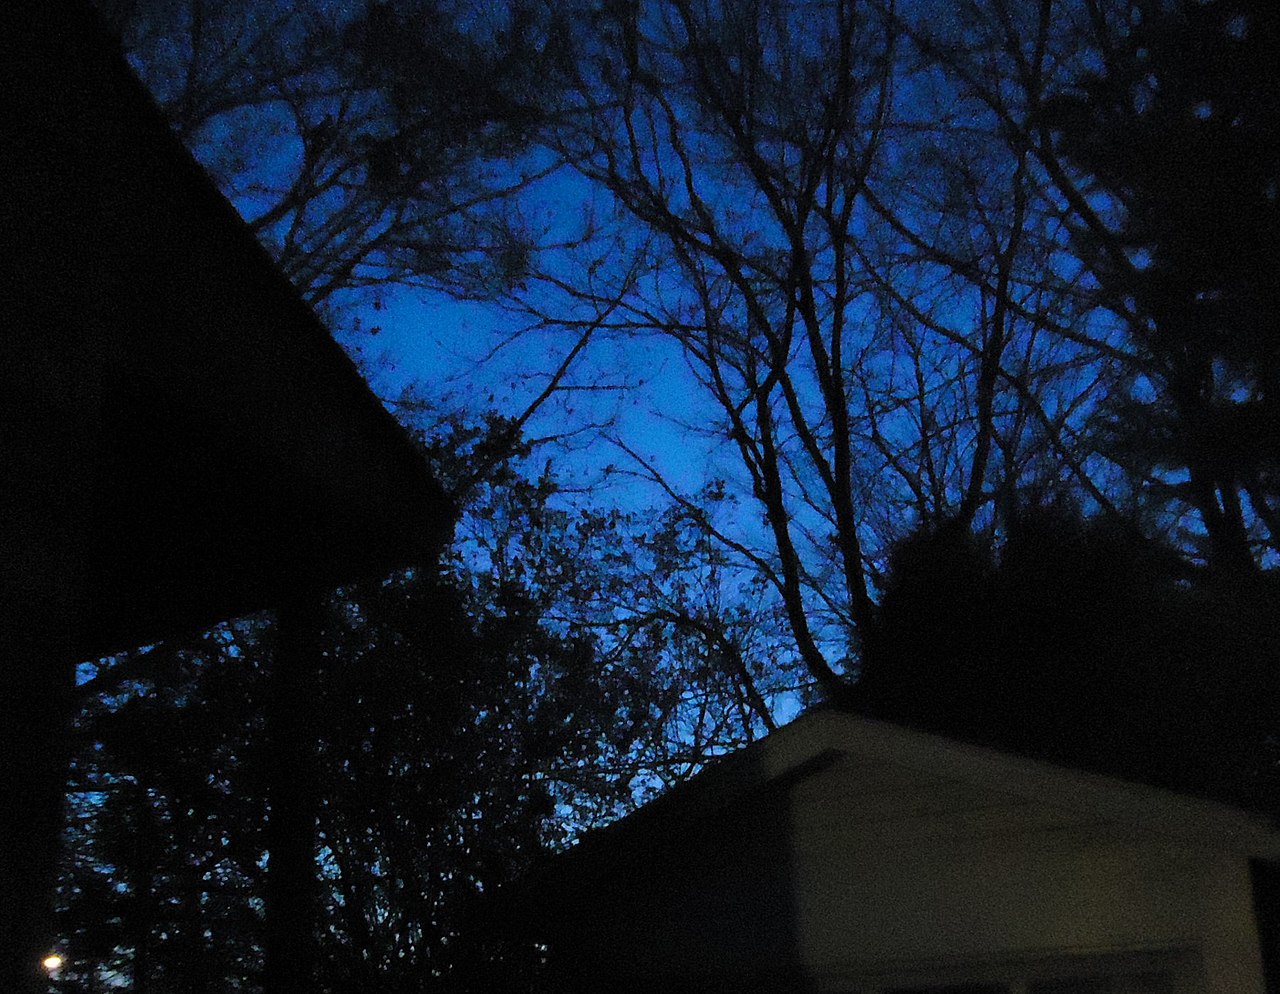 File:Deep blue sky in twilight with trees and garage.JPG - Wikipedia